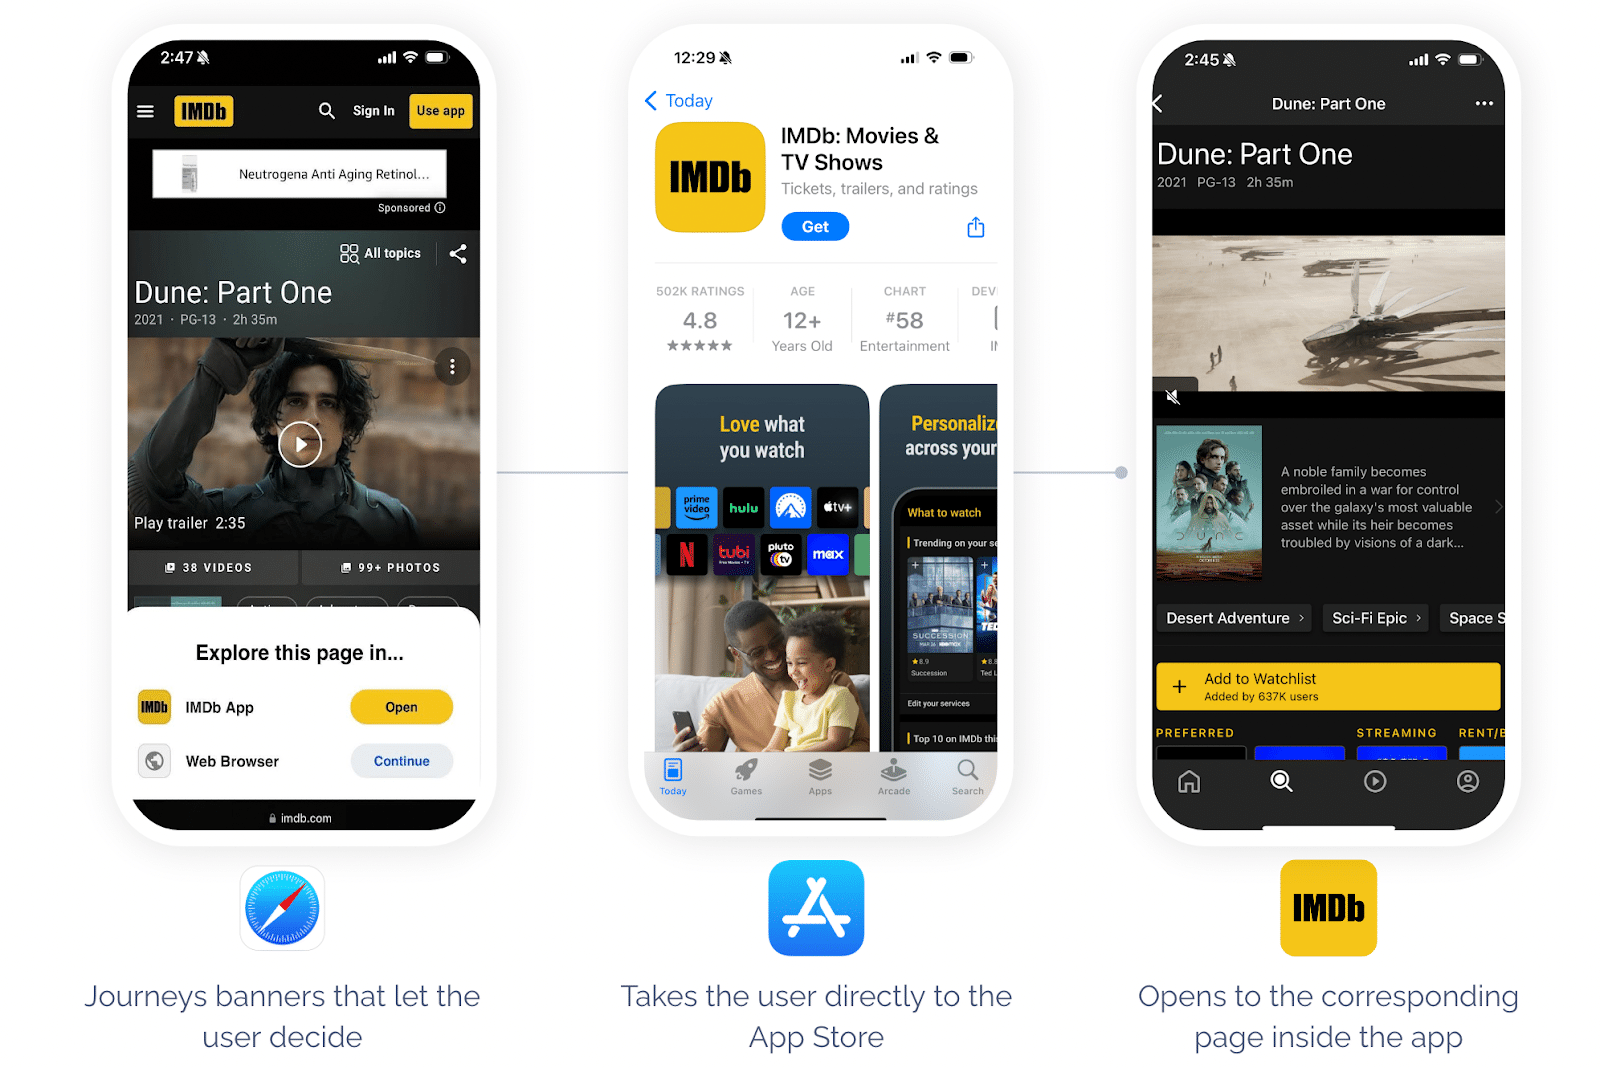 A series of smartphone screen captures showing the progression of Journeys: 1. Journeys banners that let the user decide what to do (open/download app or continue on the web browser) 2. Taking the user directly to the App Store when the option for open app is selected 3. Opening the corresponding page inside the app once it is downloaded